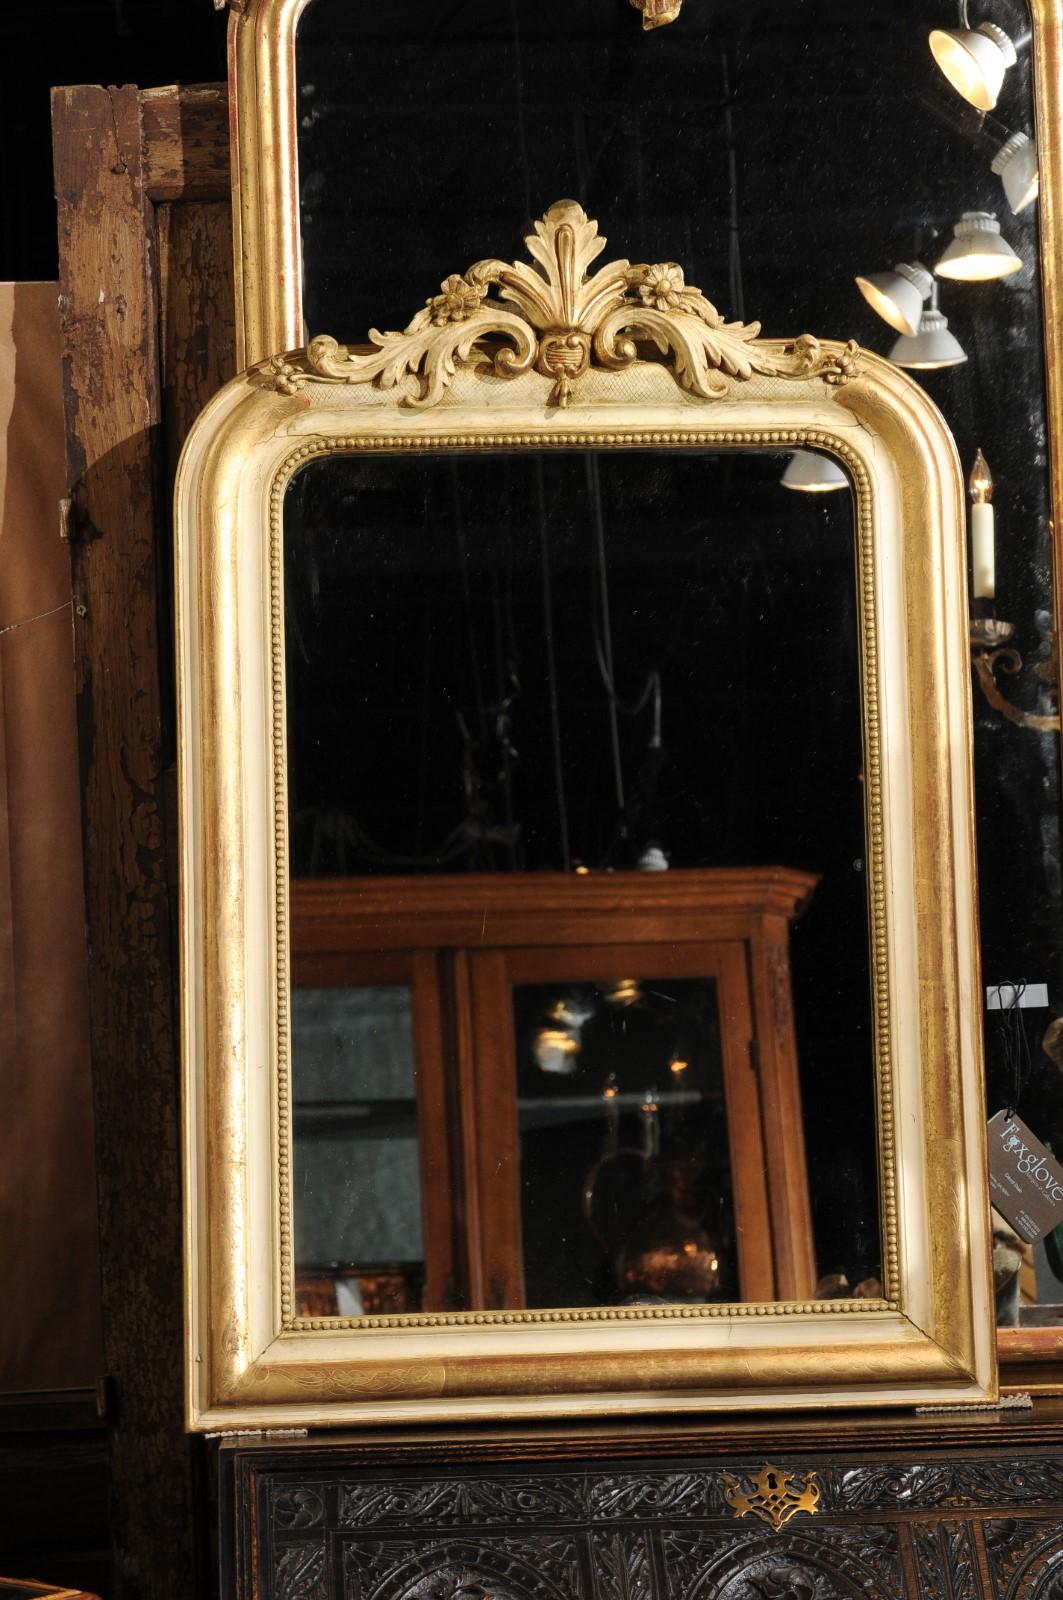 A French painted and parcel-gilt mirror from the 19th century, with acanthus leaf-carved crest and beads. This medium size French mirror features an elegant Louis-Philippe inspired frame, alternating painted and gilded accents. The mirror plate is